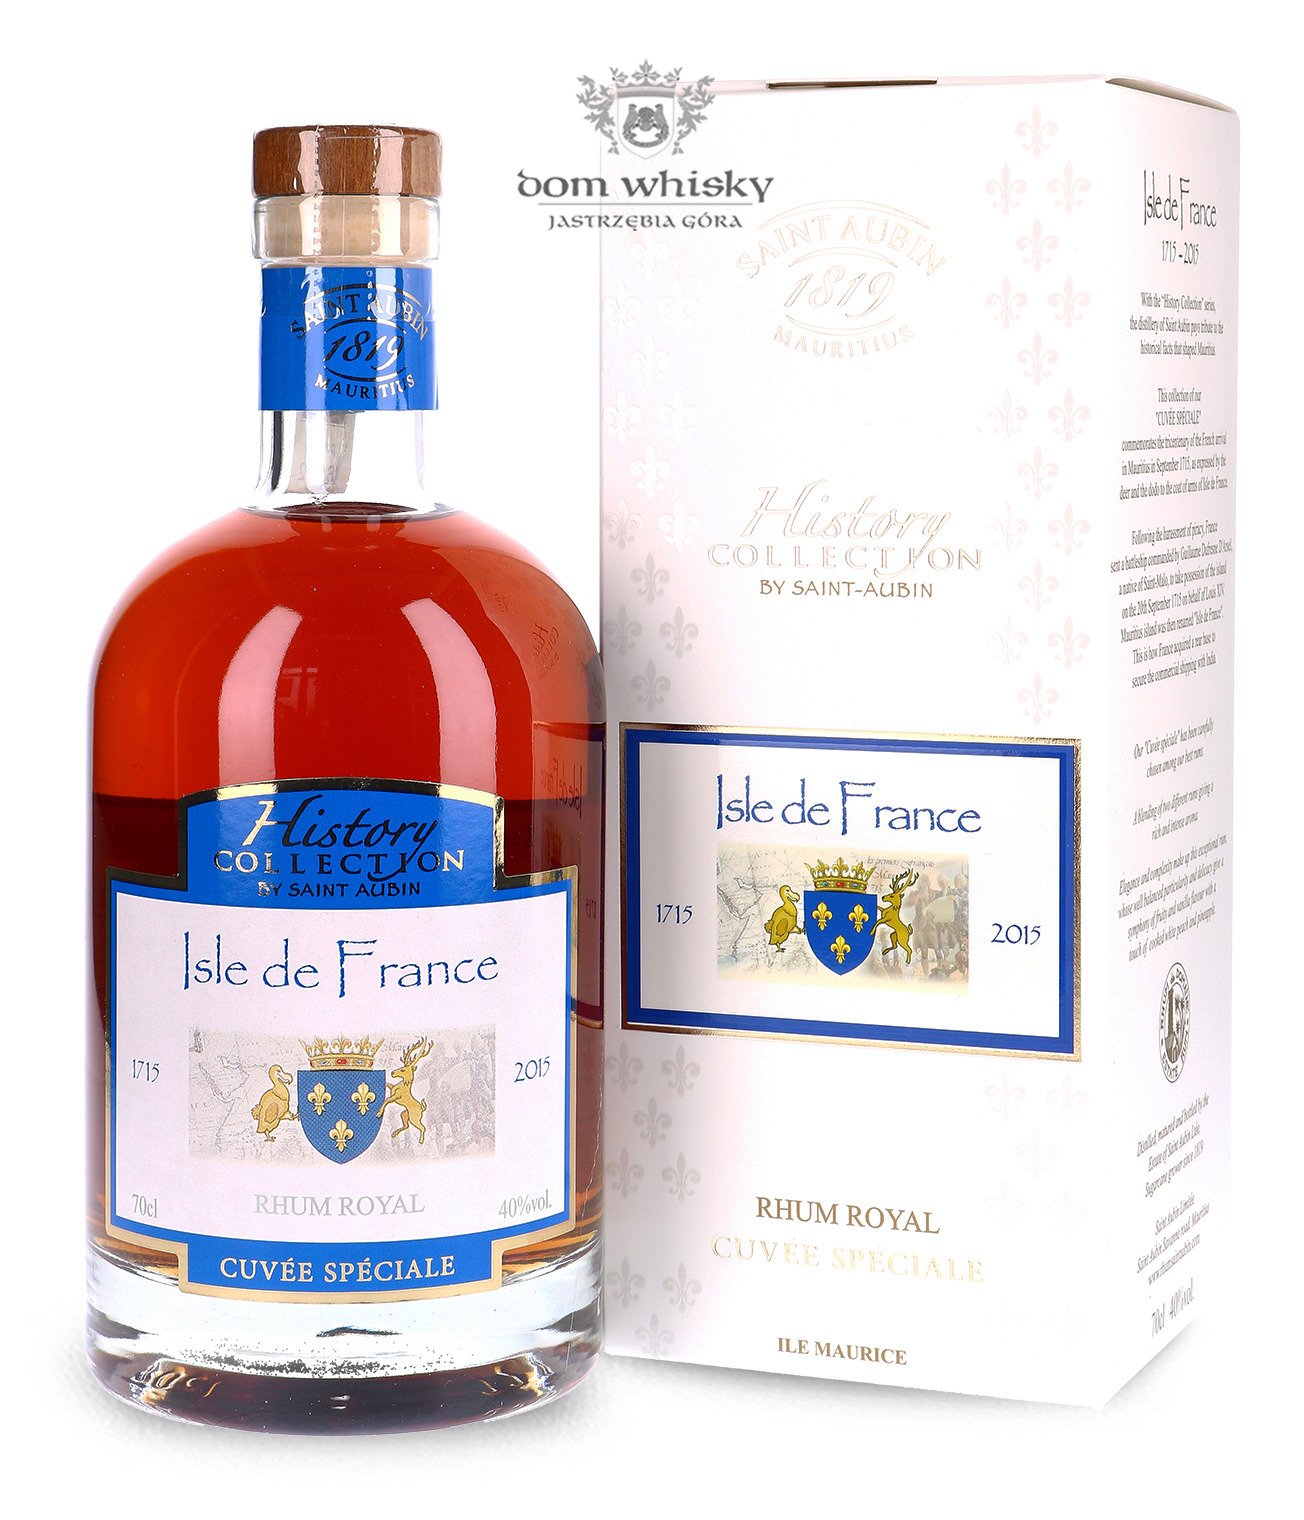 Whisky / / 0,7l France Dom 40% Speciale de | Cuvee Isle Rum